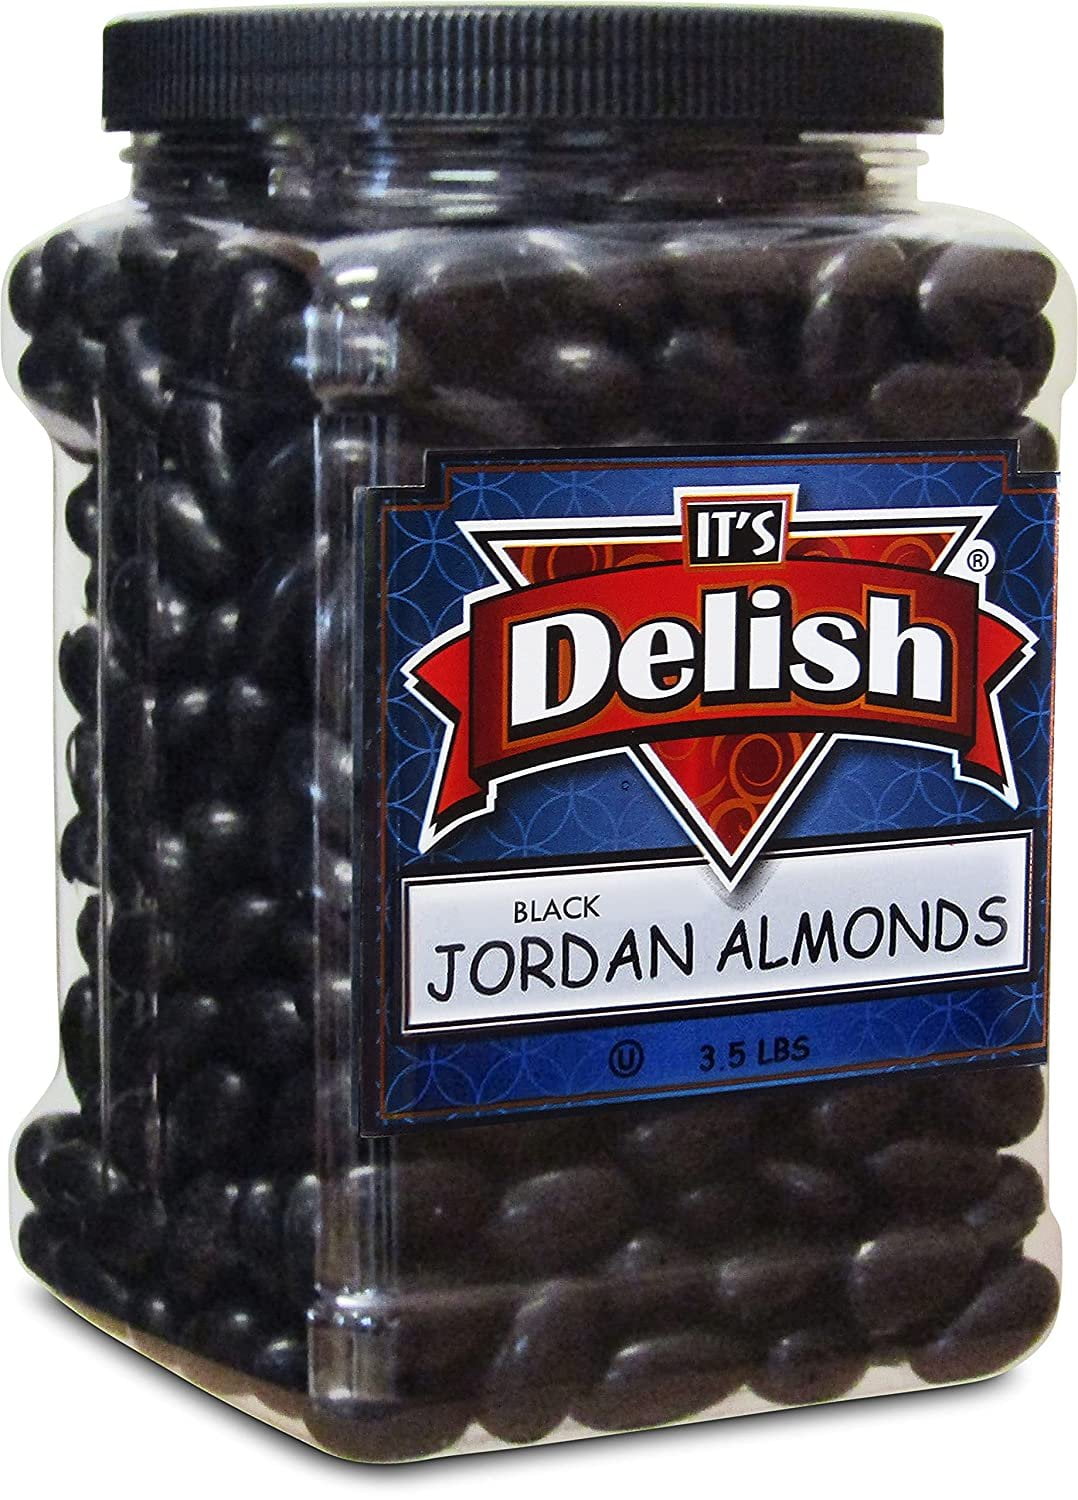 Black Jordan Almonds by Its Delish, 3.5 lbs Jumbo Container Candied ...